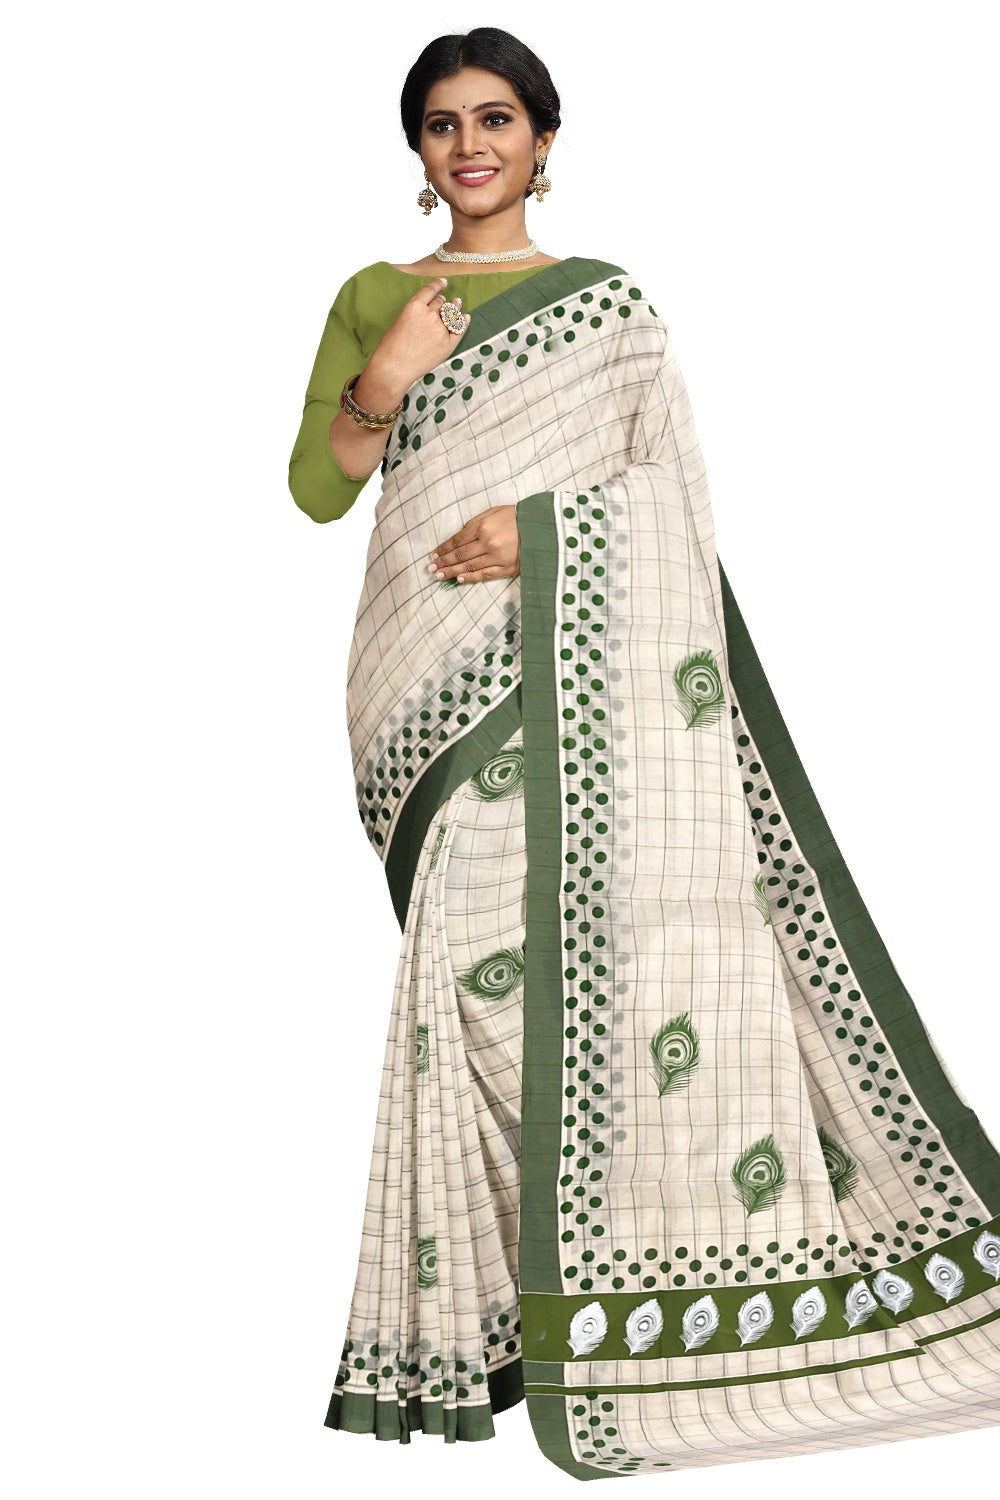 Pure Cotton Check Design Kerala Saree with Light Green Polka Dots and Feather Block Prints